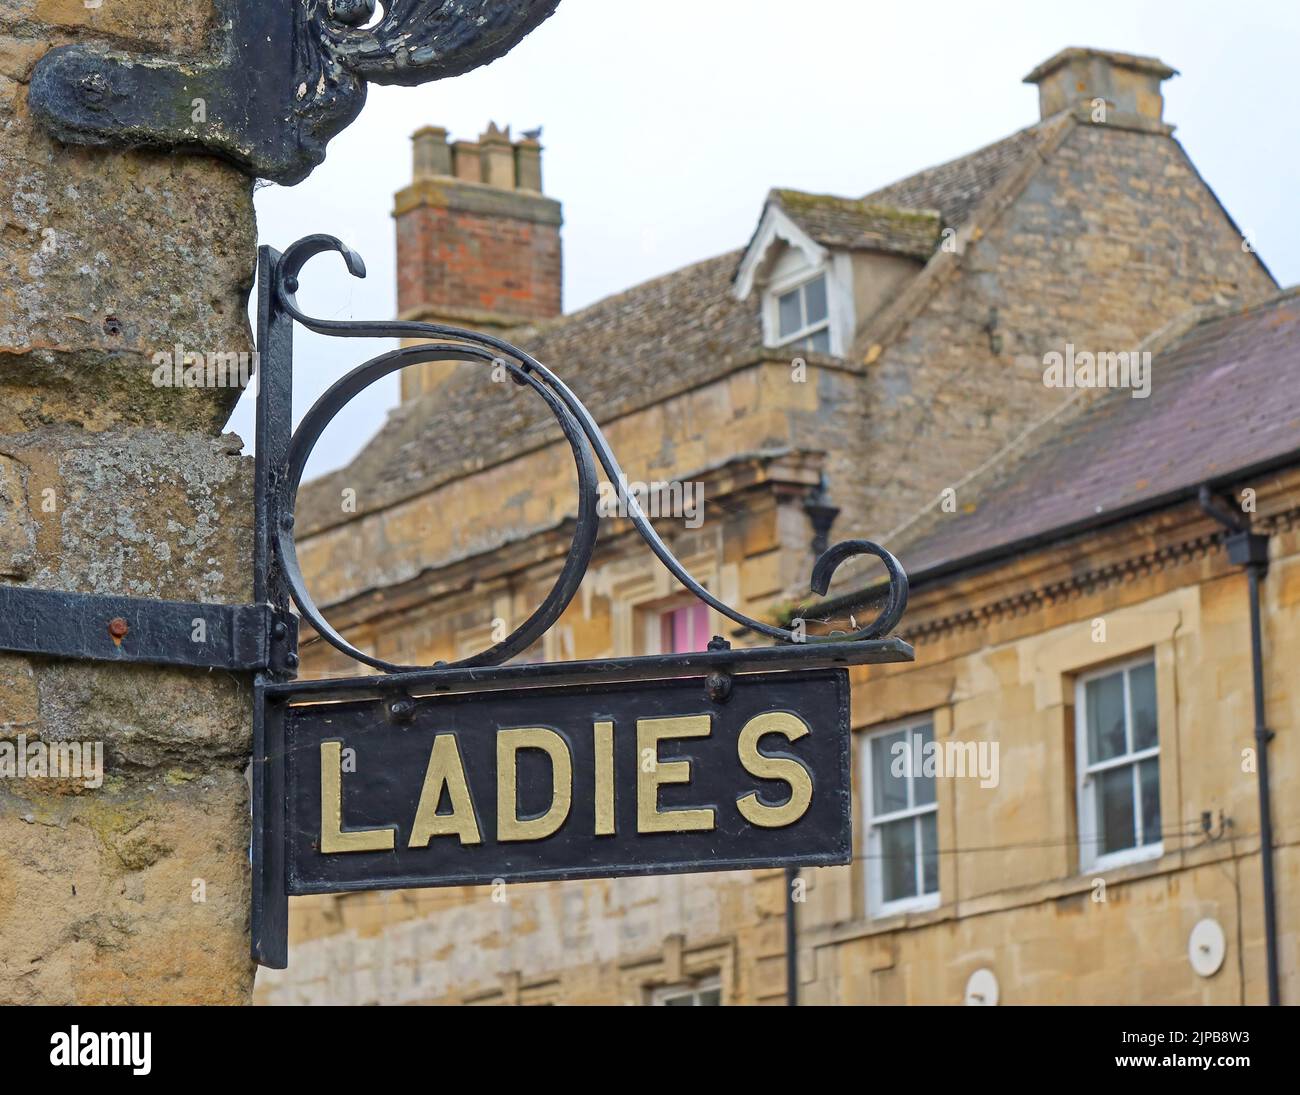 Public conveniences Ladies sign at The old town hall, Chipping Norton, West Oxfordshire, England, UK,  OX7 5NA Stock Photo